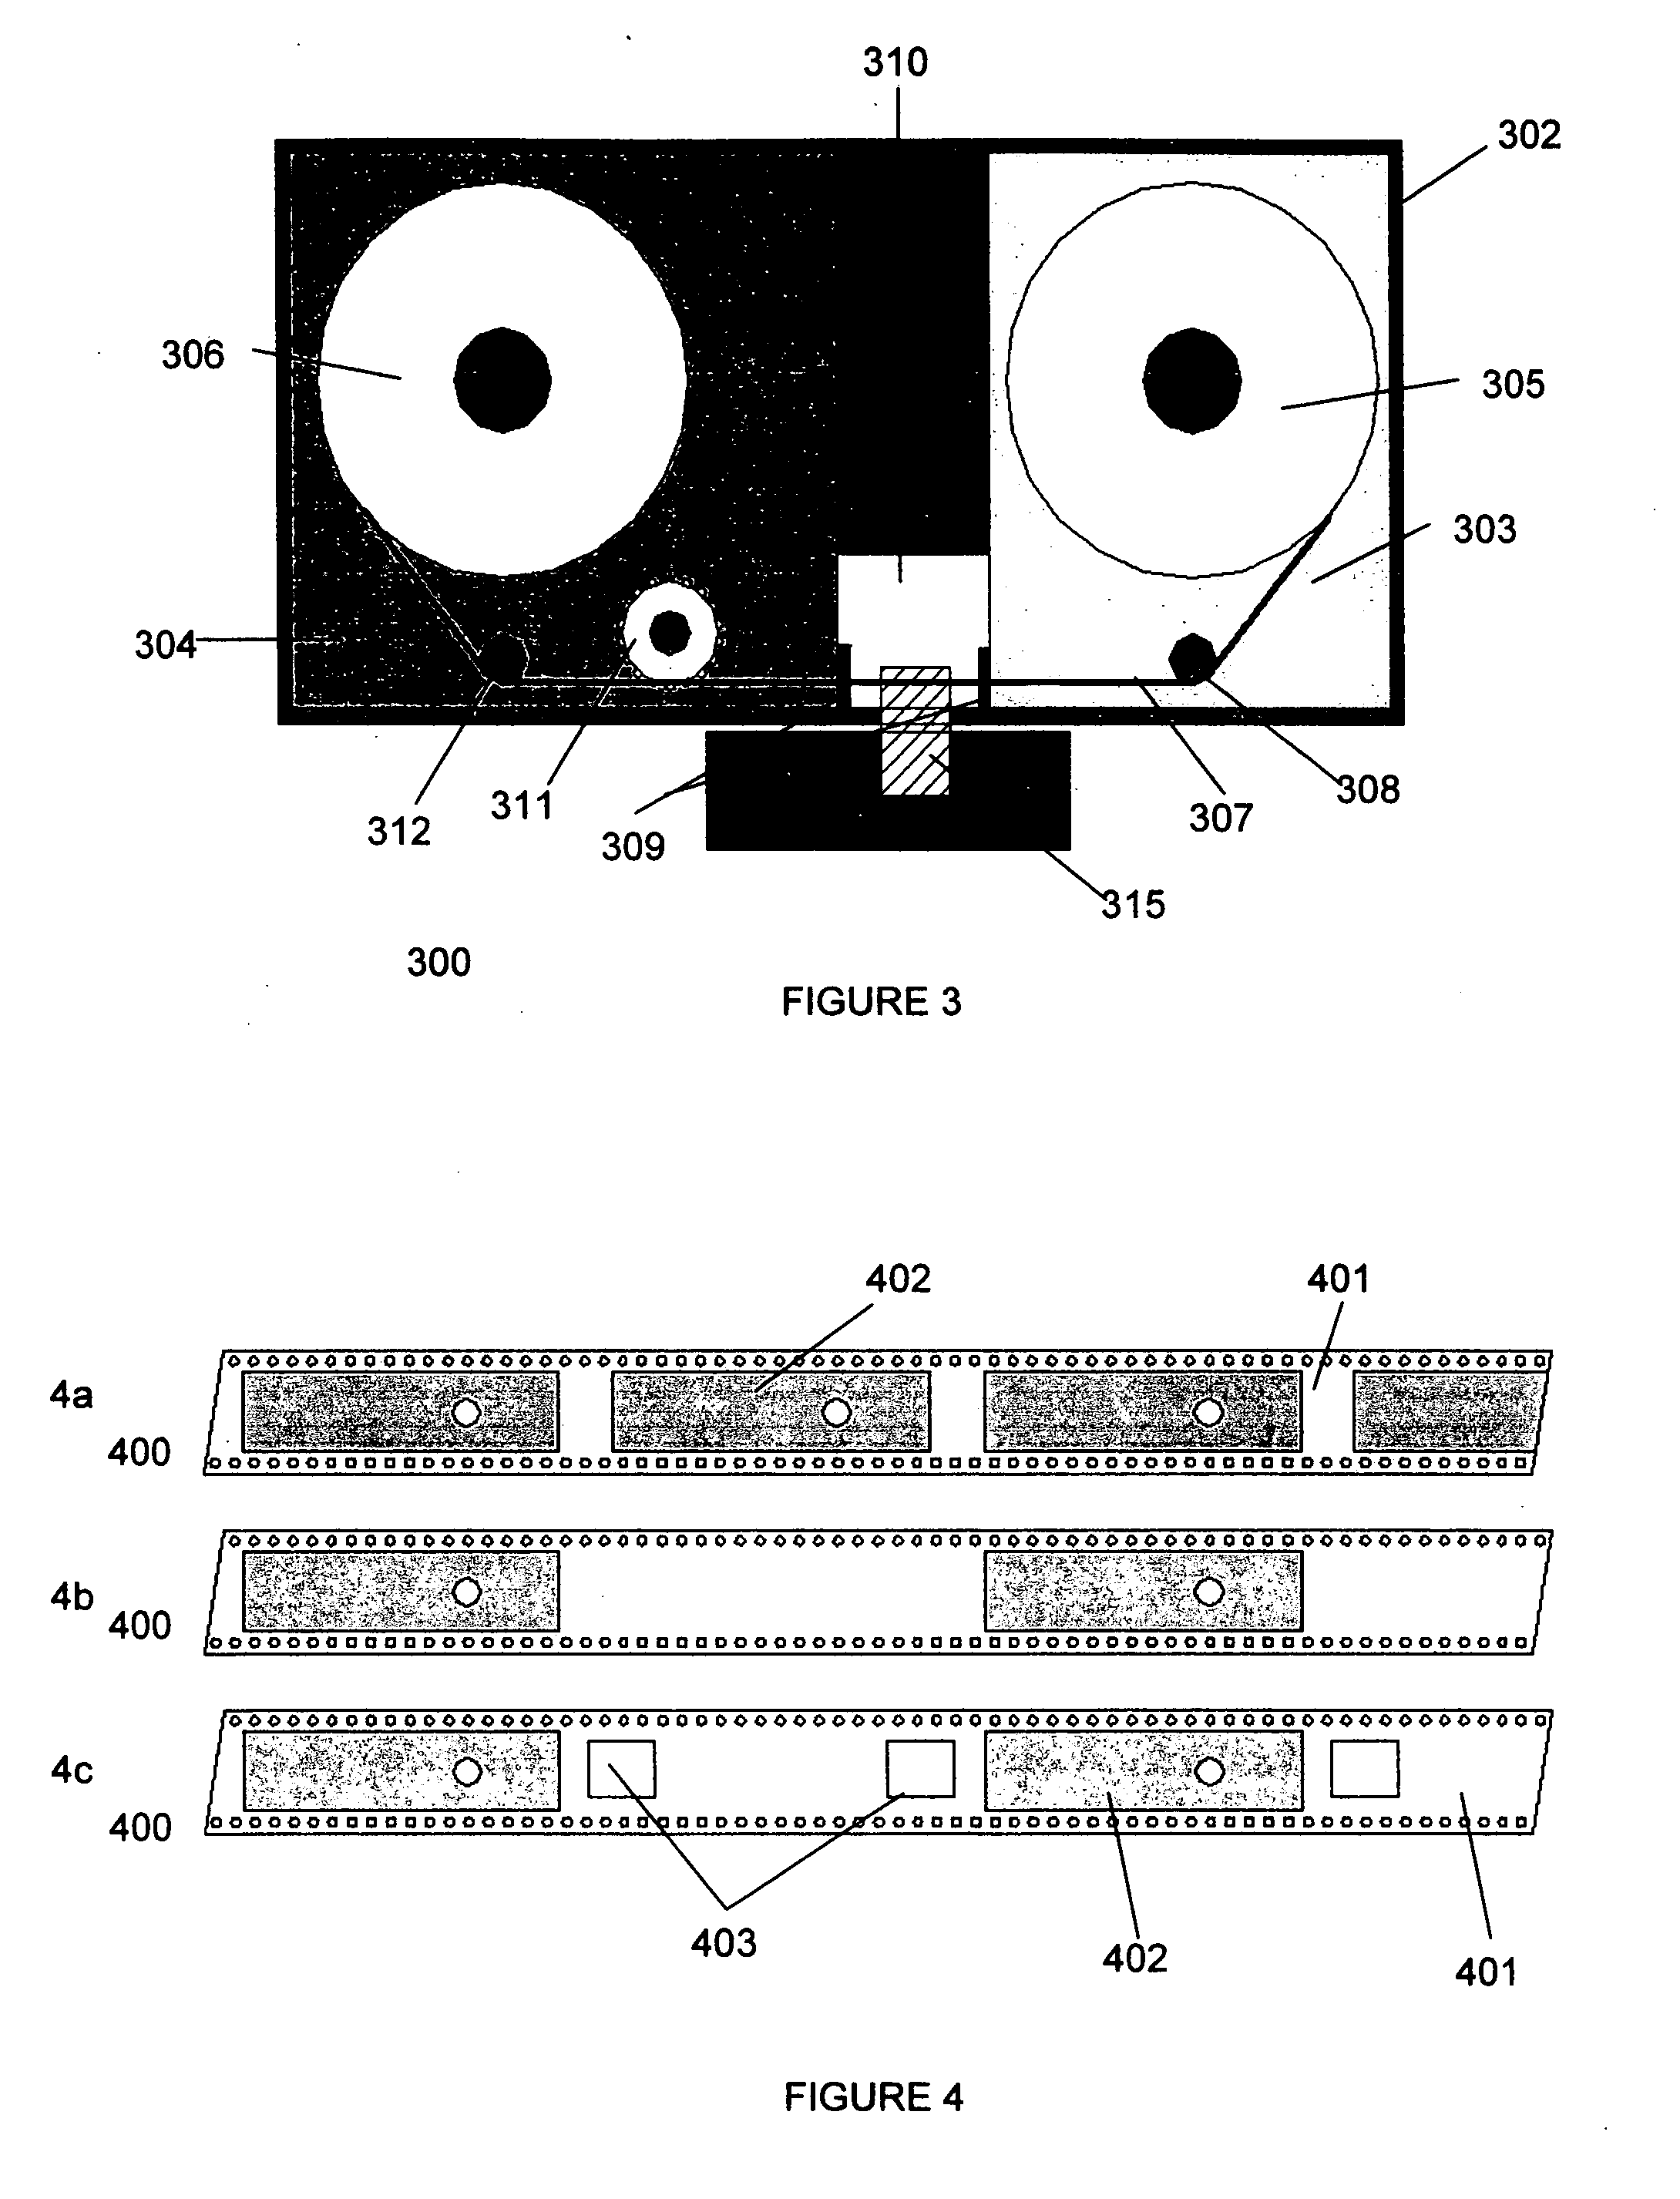 Test substrate handling apparatus